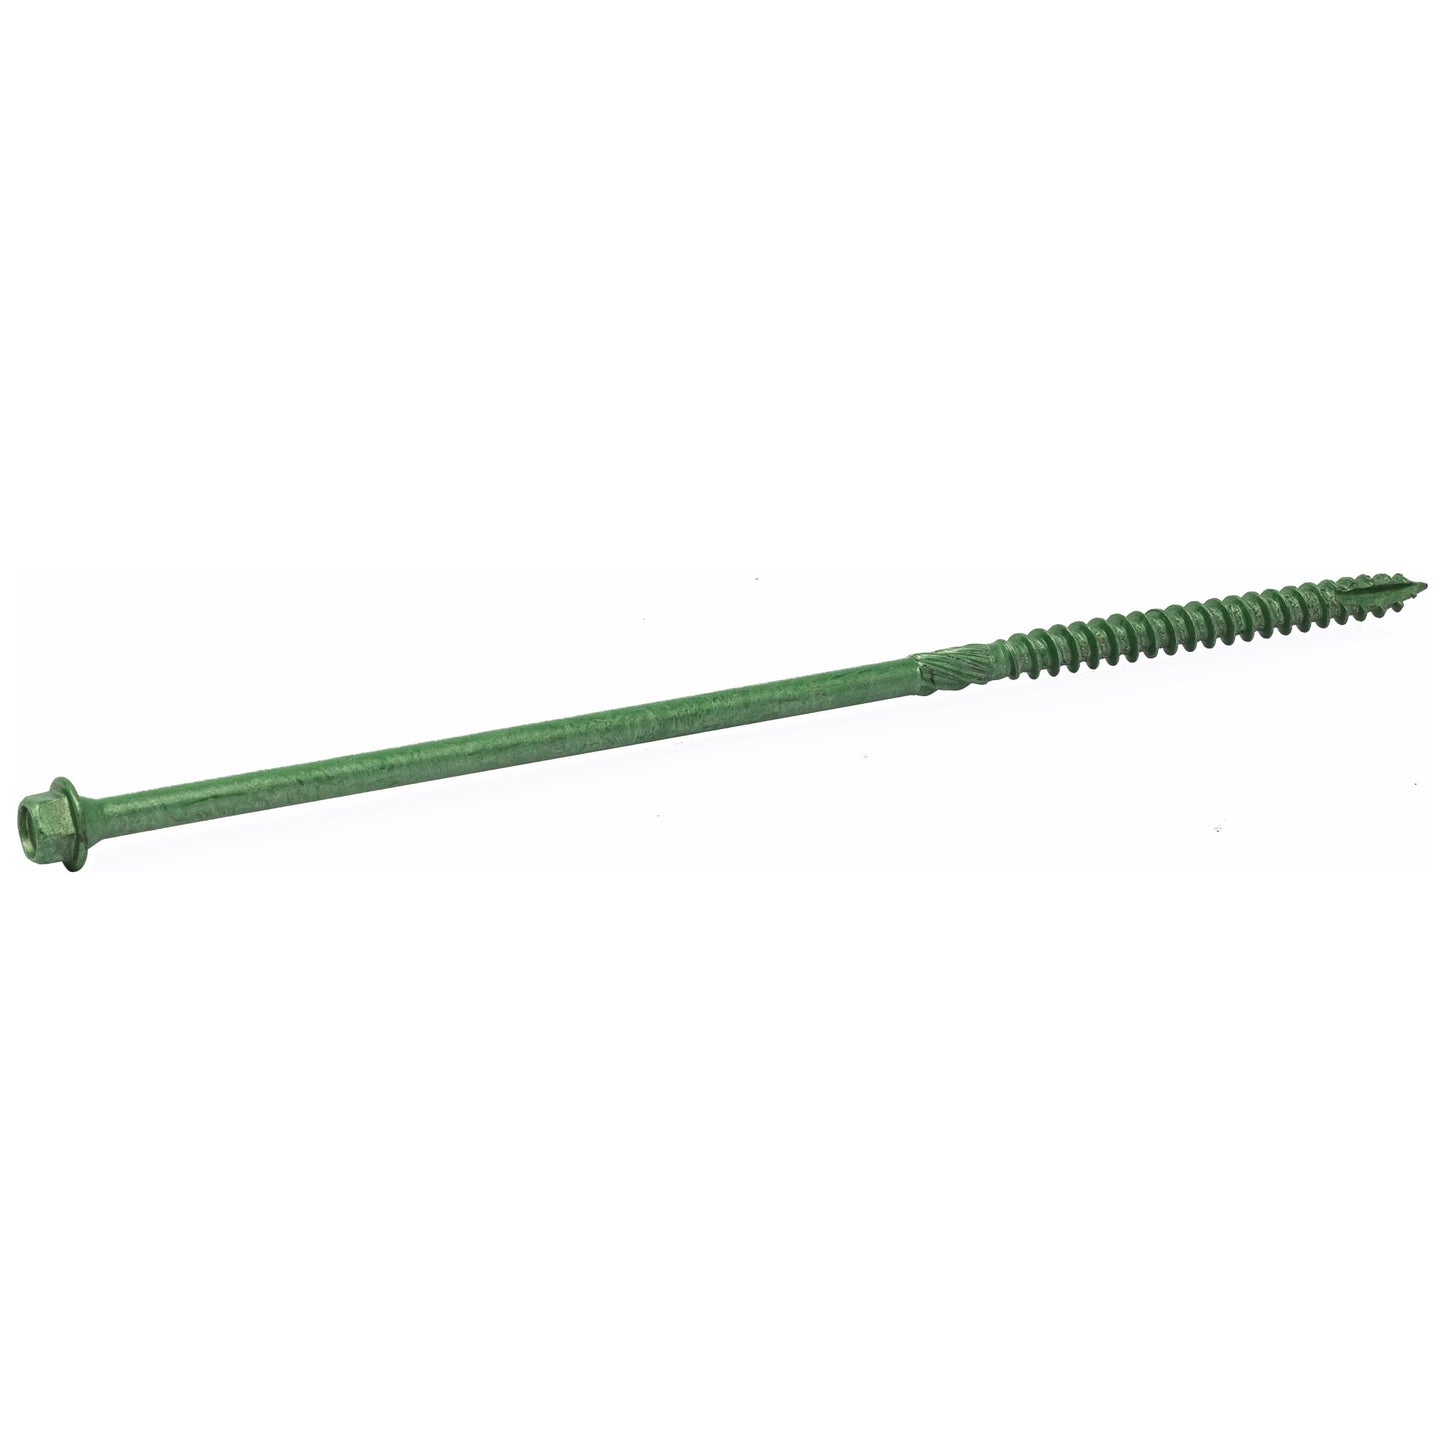 Timber Frame Construction & Landscaping Screws - Hex Head - Green